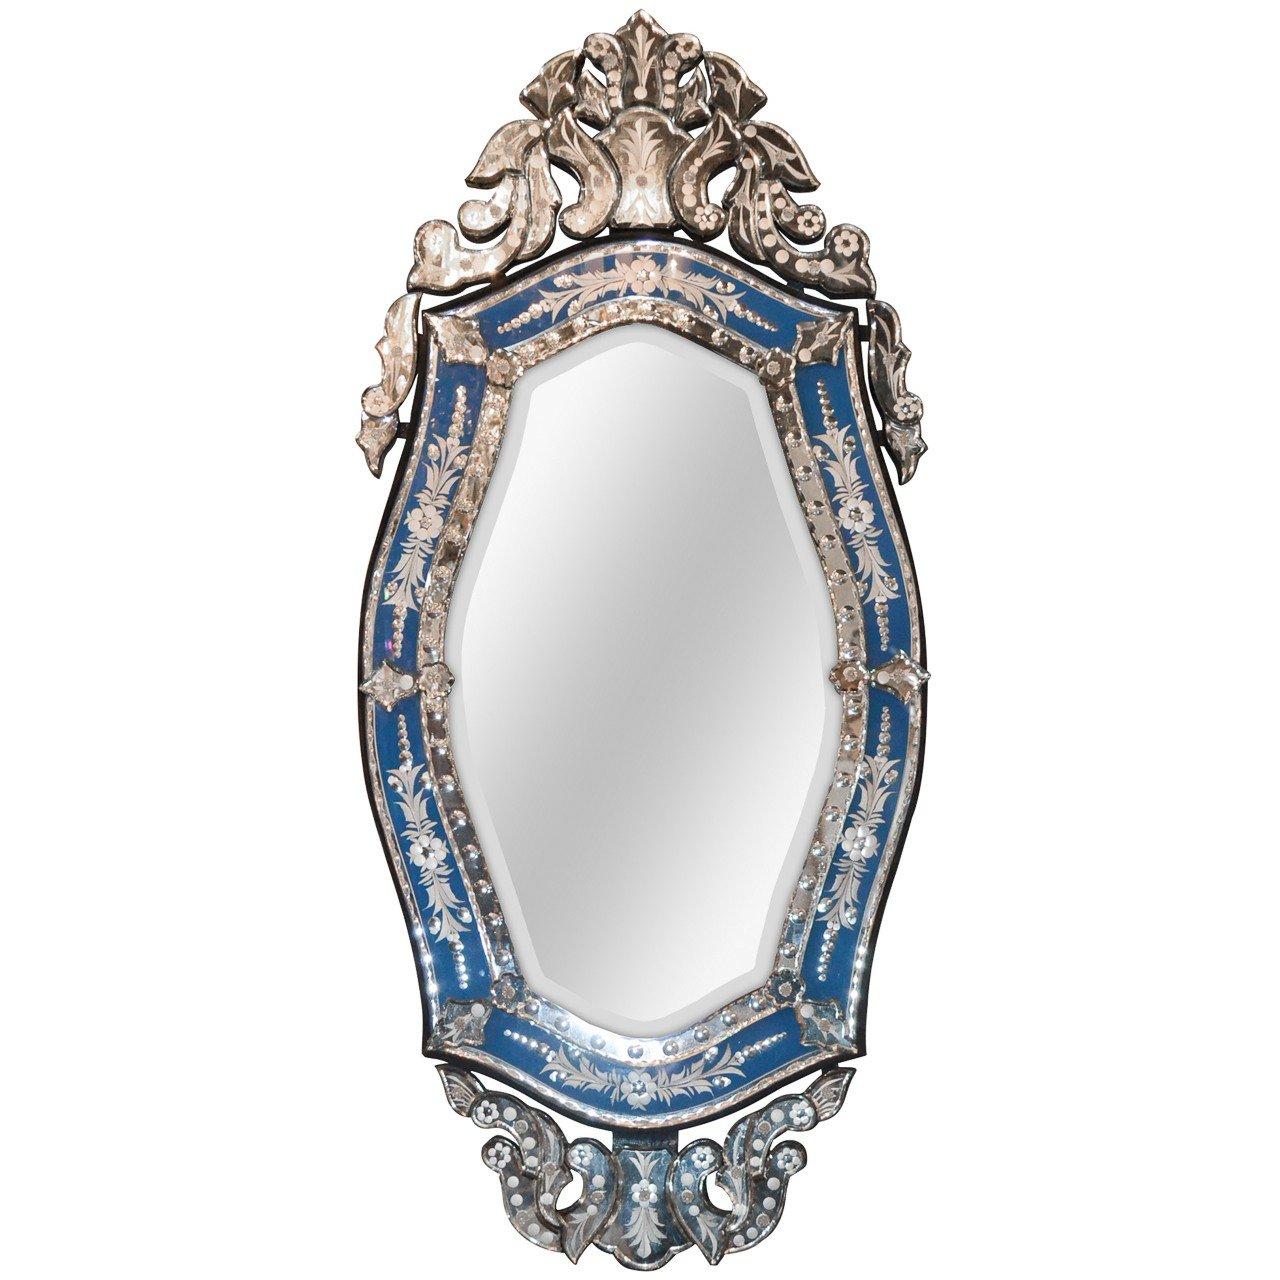 A dazzling Venetian statement mirror! Unusual blue color.
Made in Italy in the 1920s.